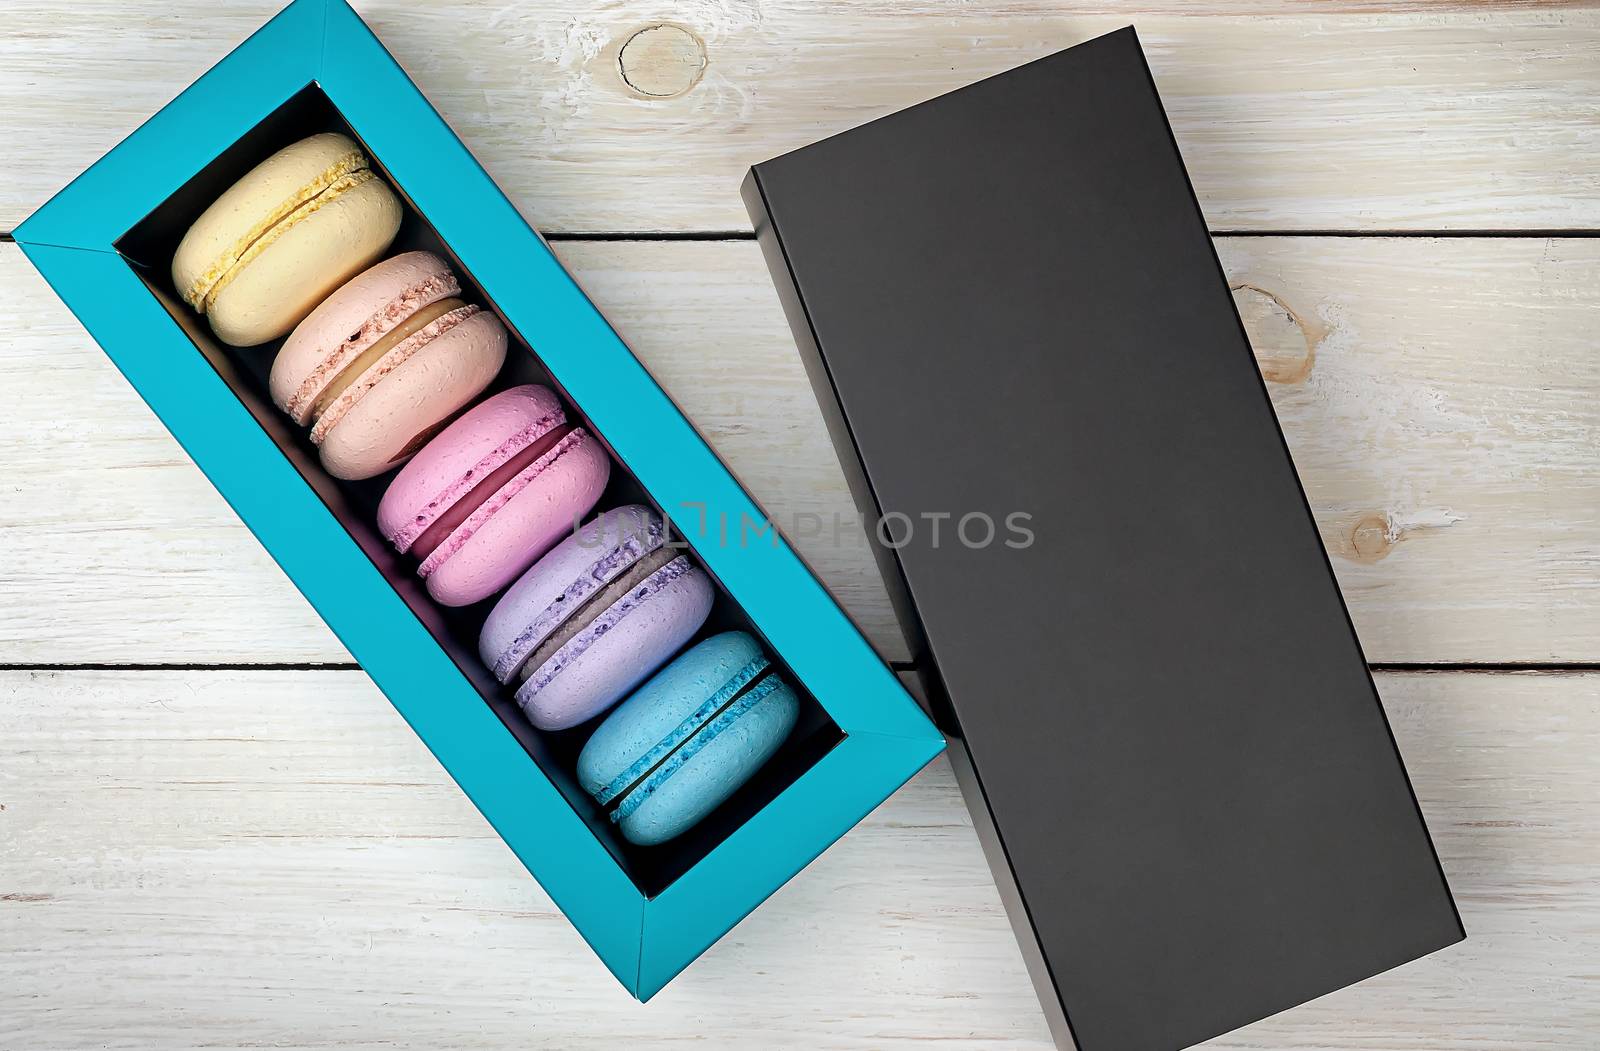 Macaroons in box next to lid by Cipariss